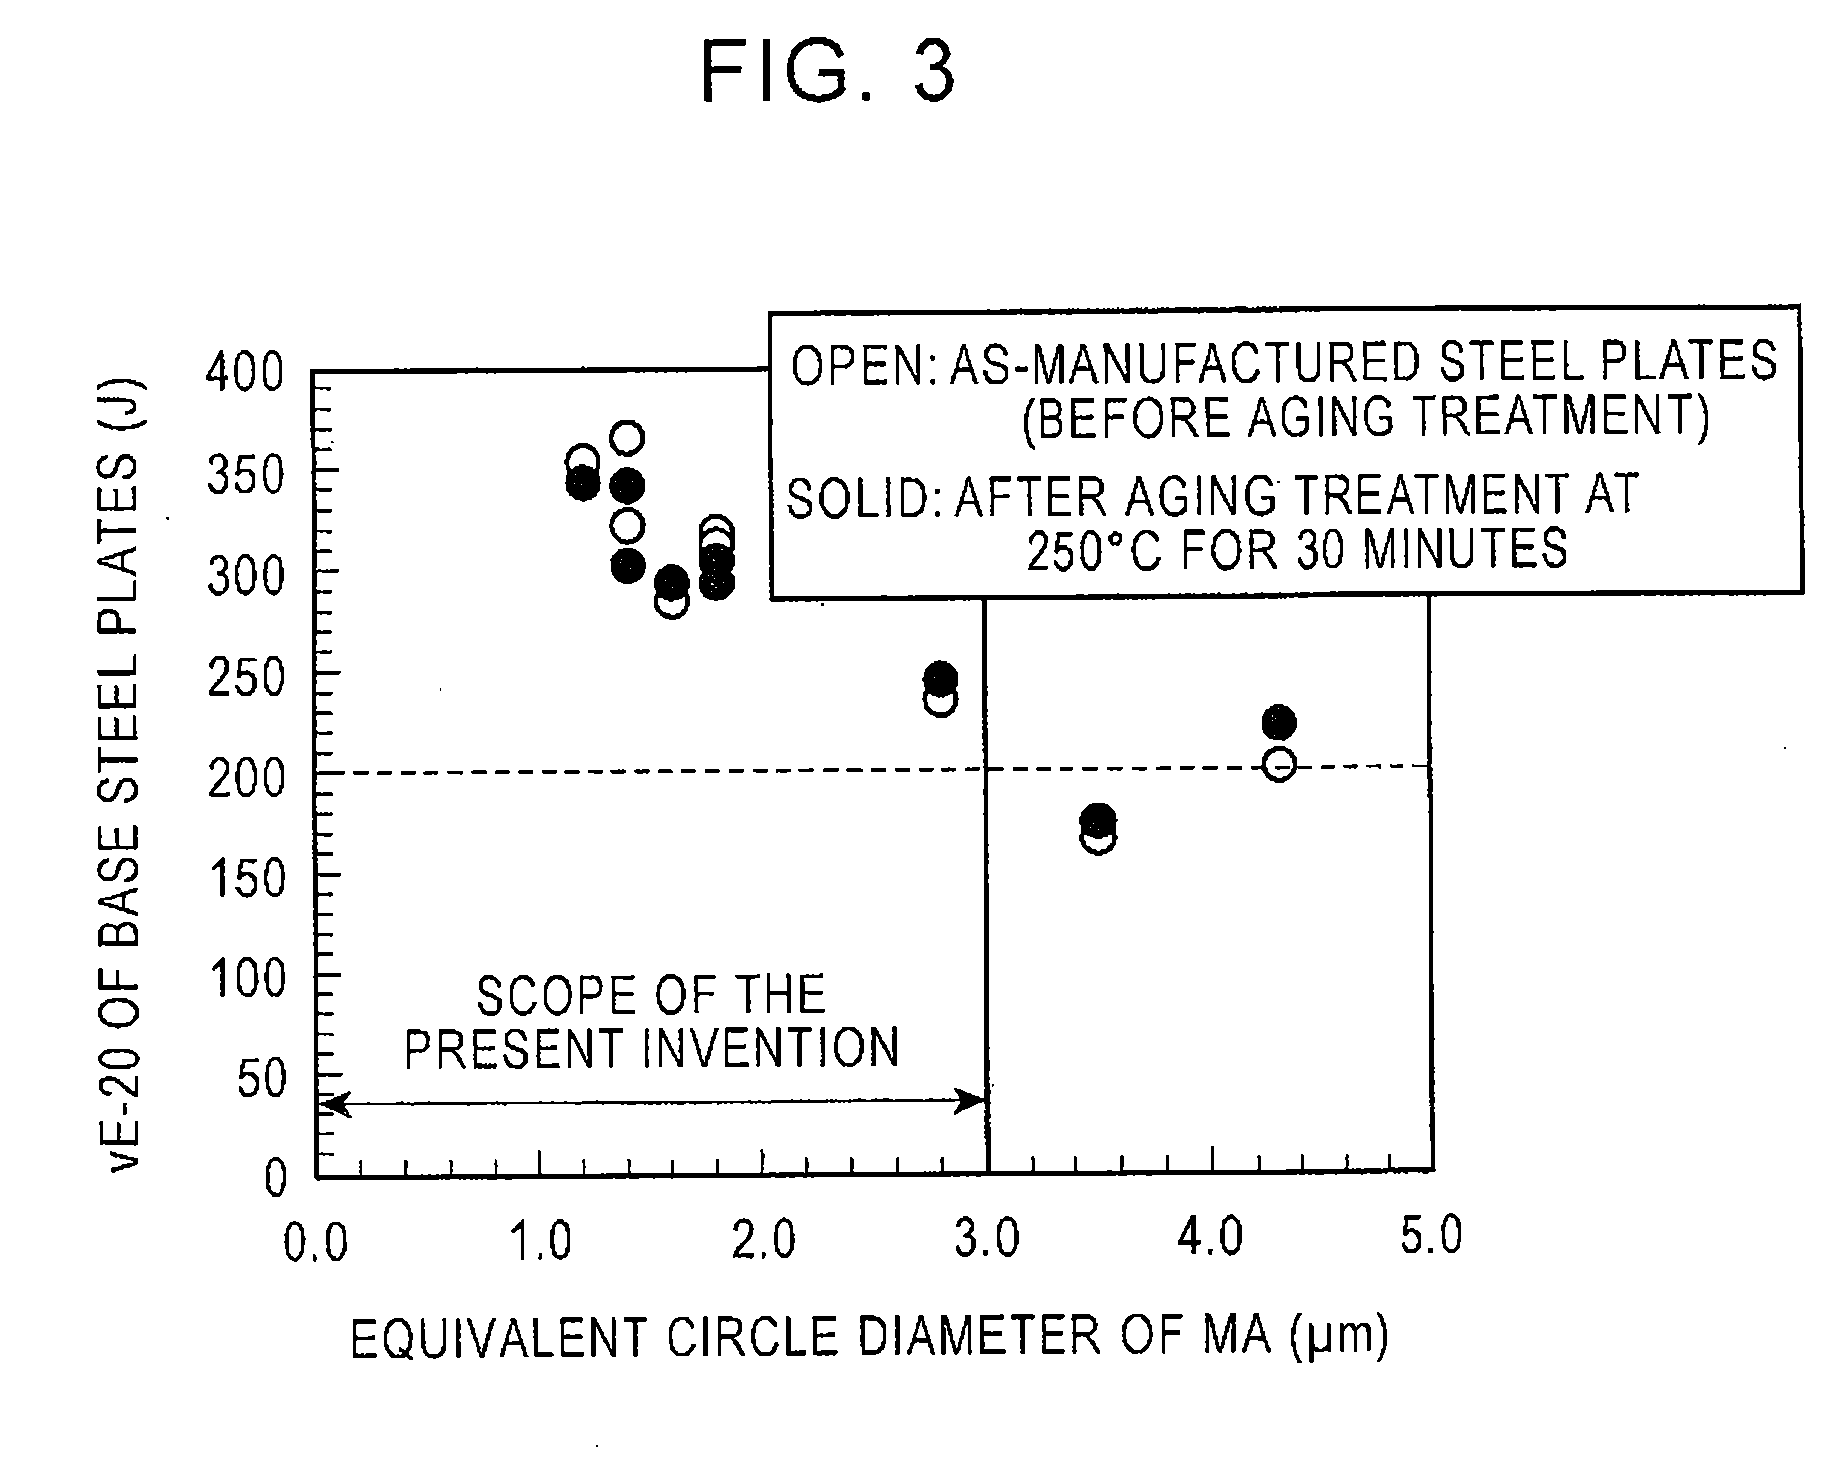 Low yield ratio, high strength and high uniform elongation steel plate and method for manufacturing the same